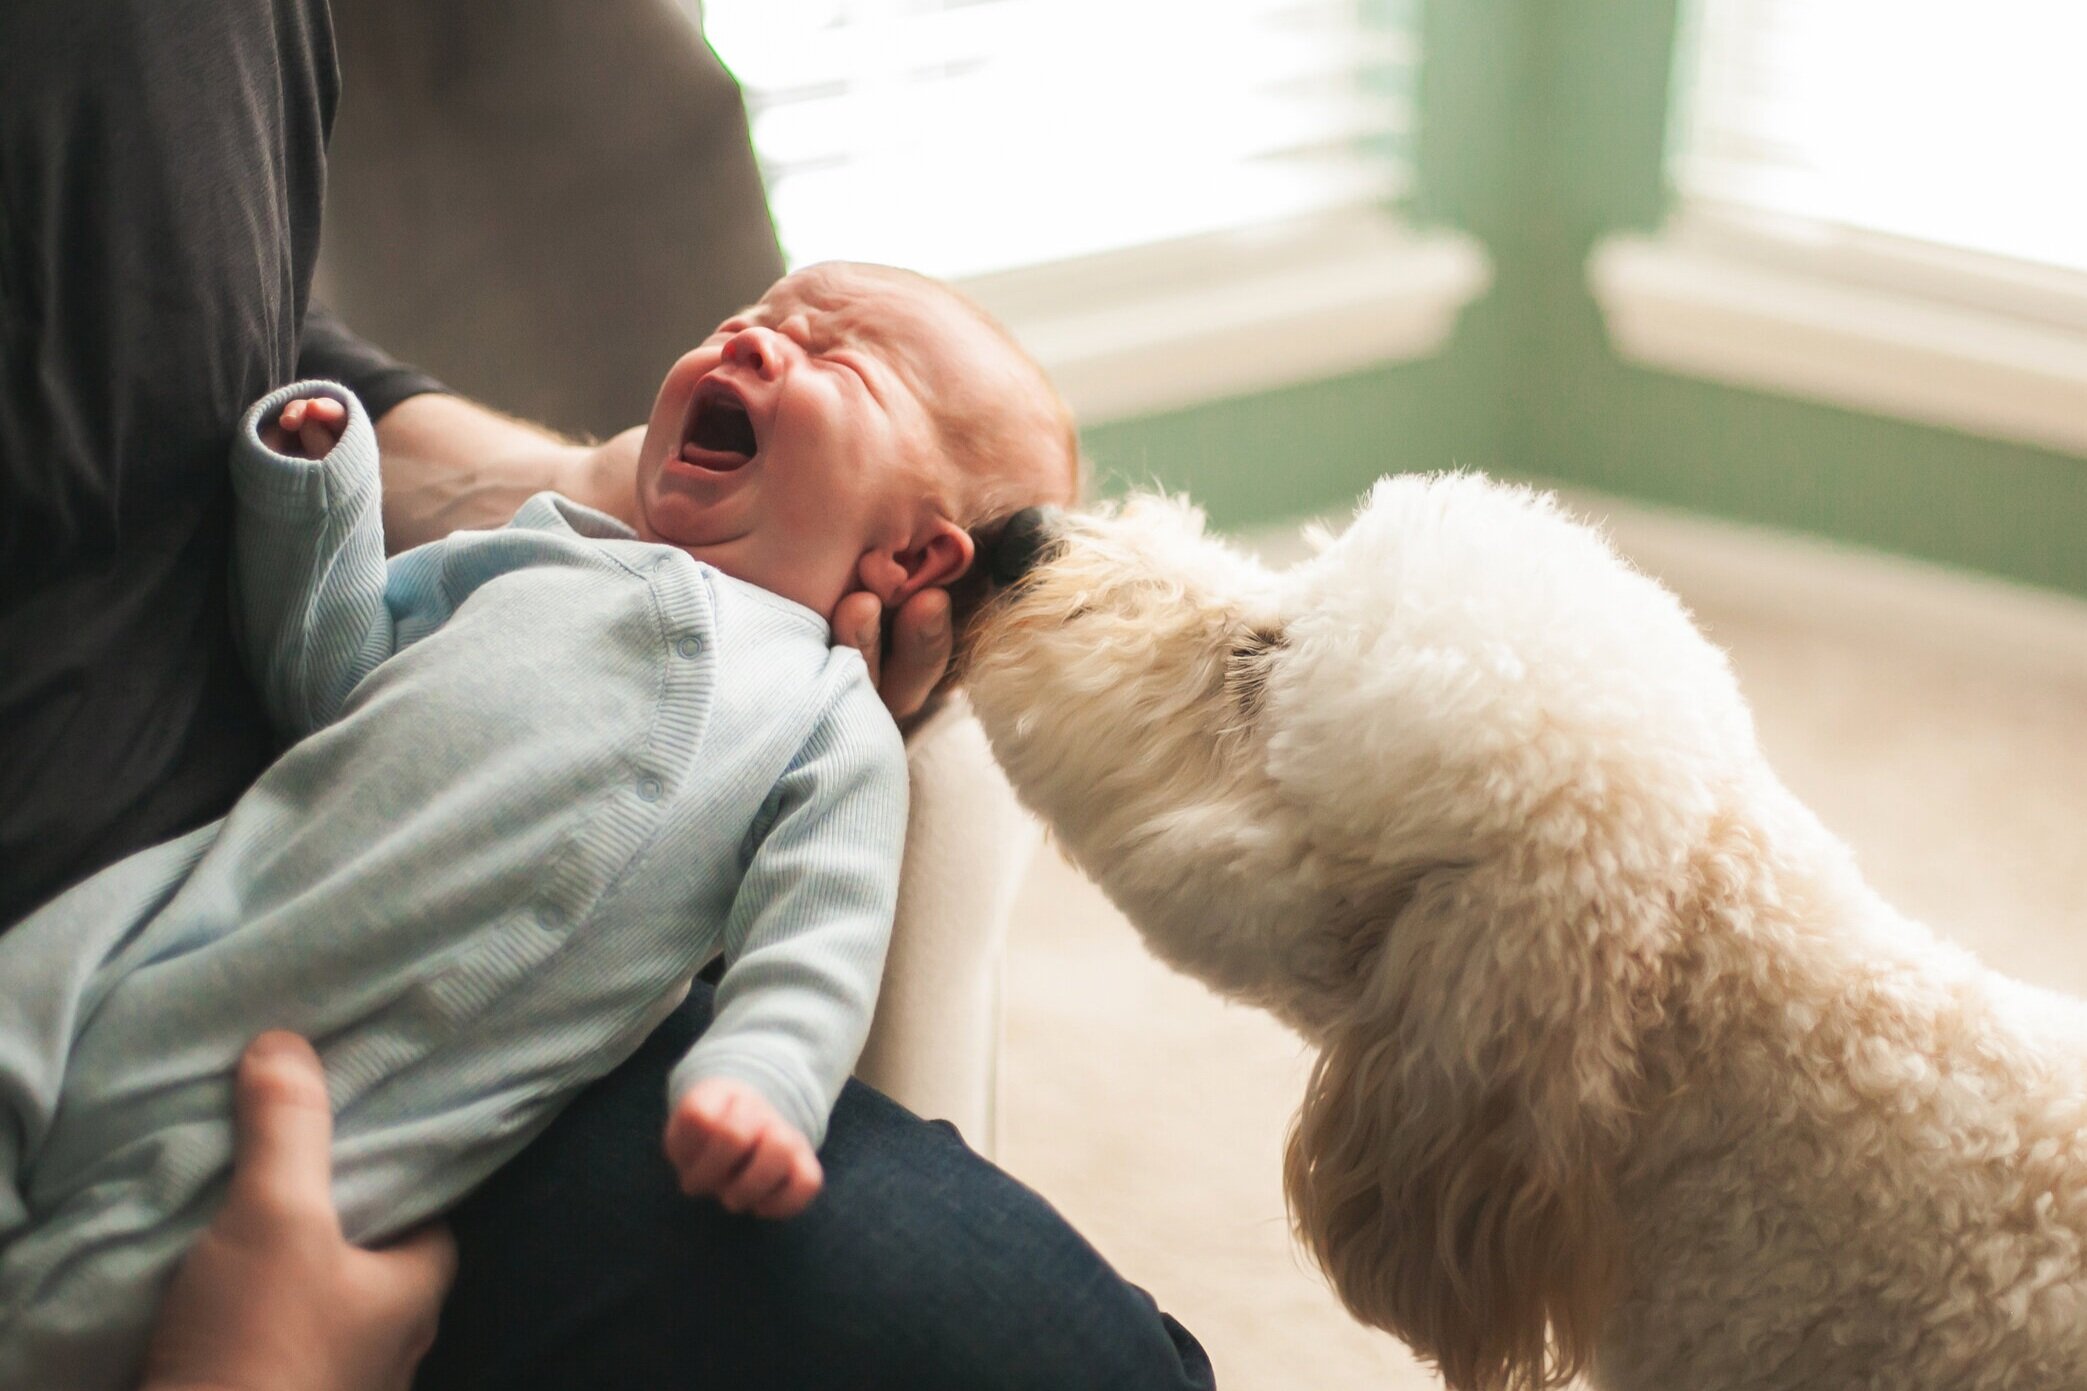 introducing-new-baby-to-pup-dog-crying-baby-new-normal-in-home-lifestyle-session-photographer-colleyville